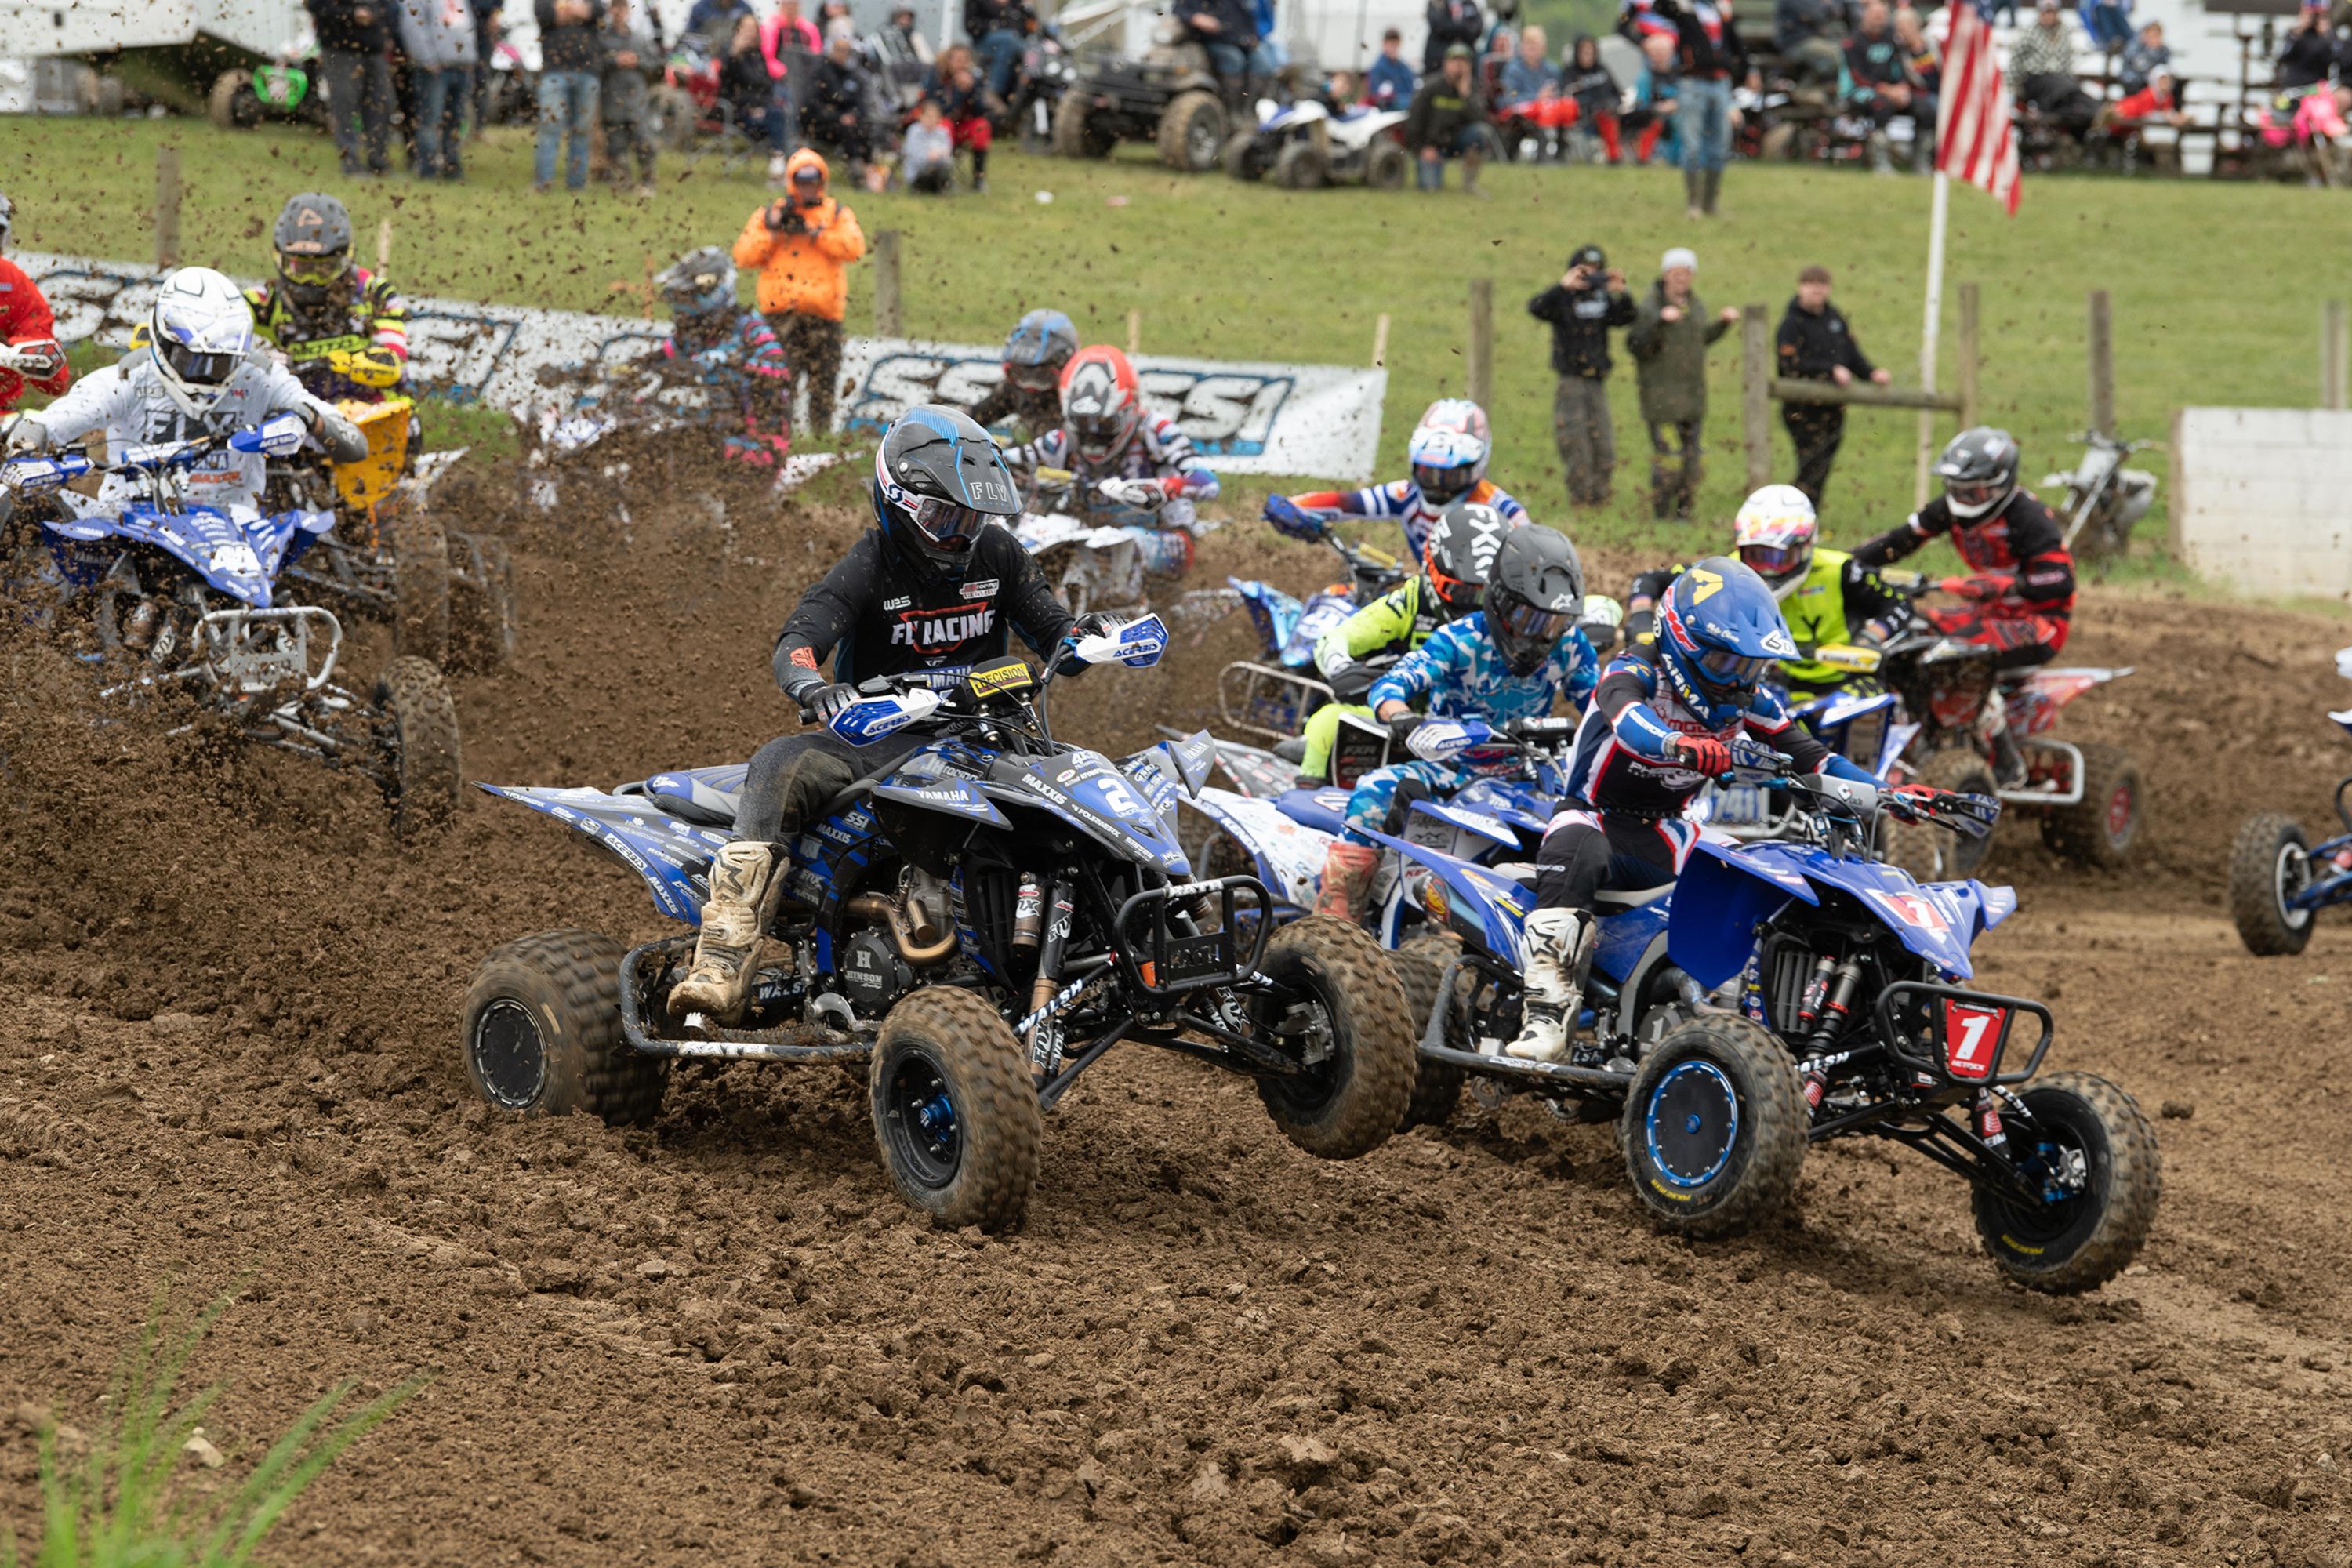 ATV Motocross Returns to Montgomery County For National Event at Ironman Raceway This Weekend